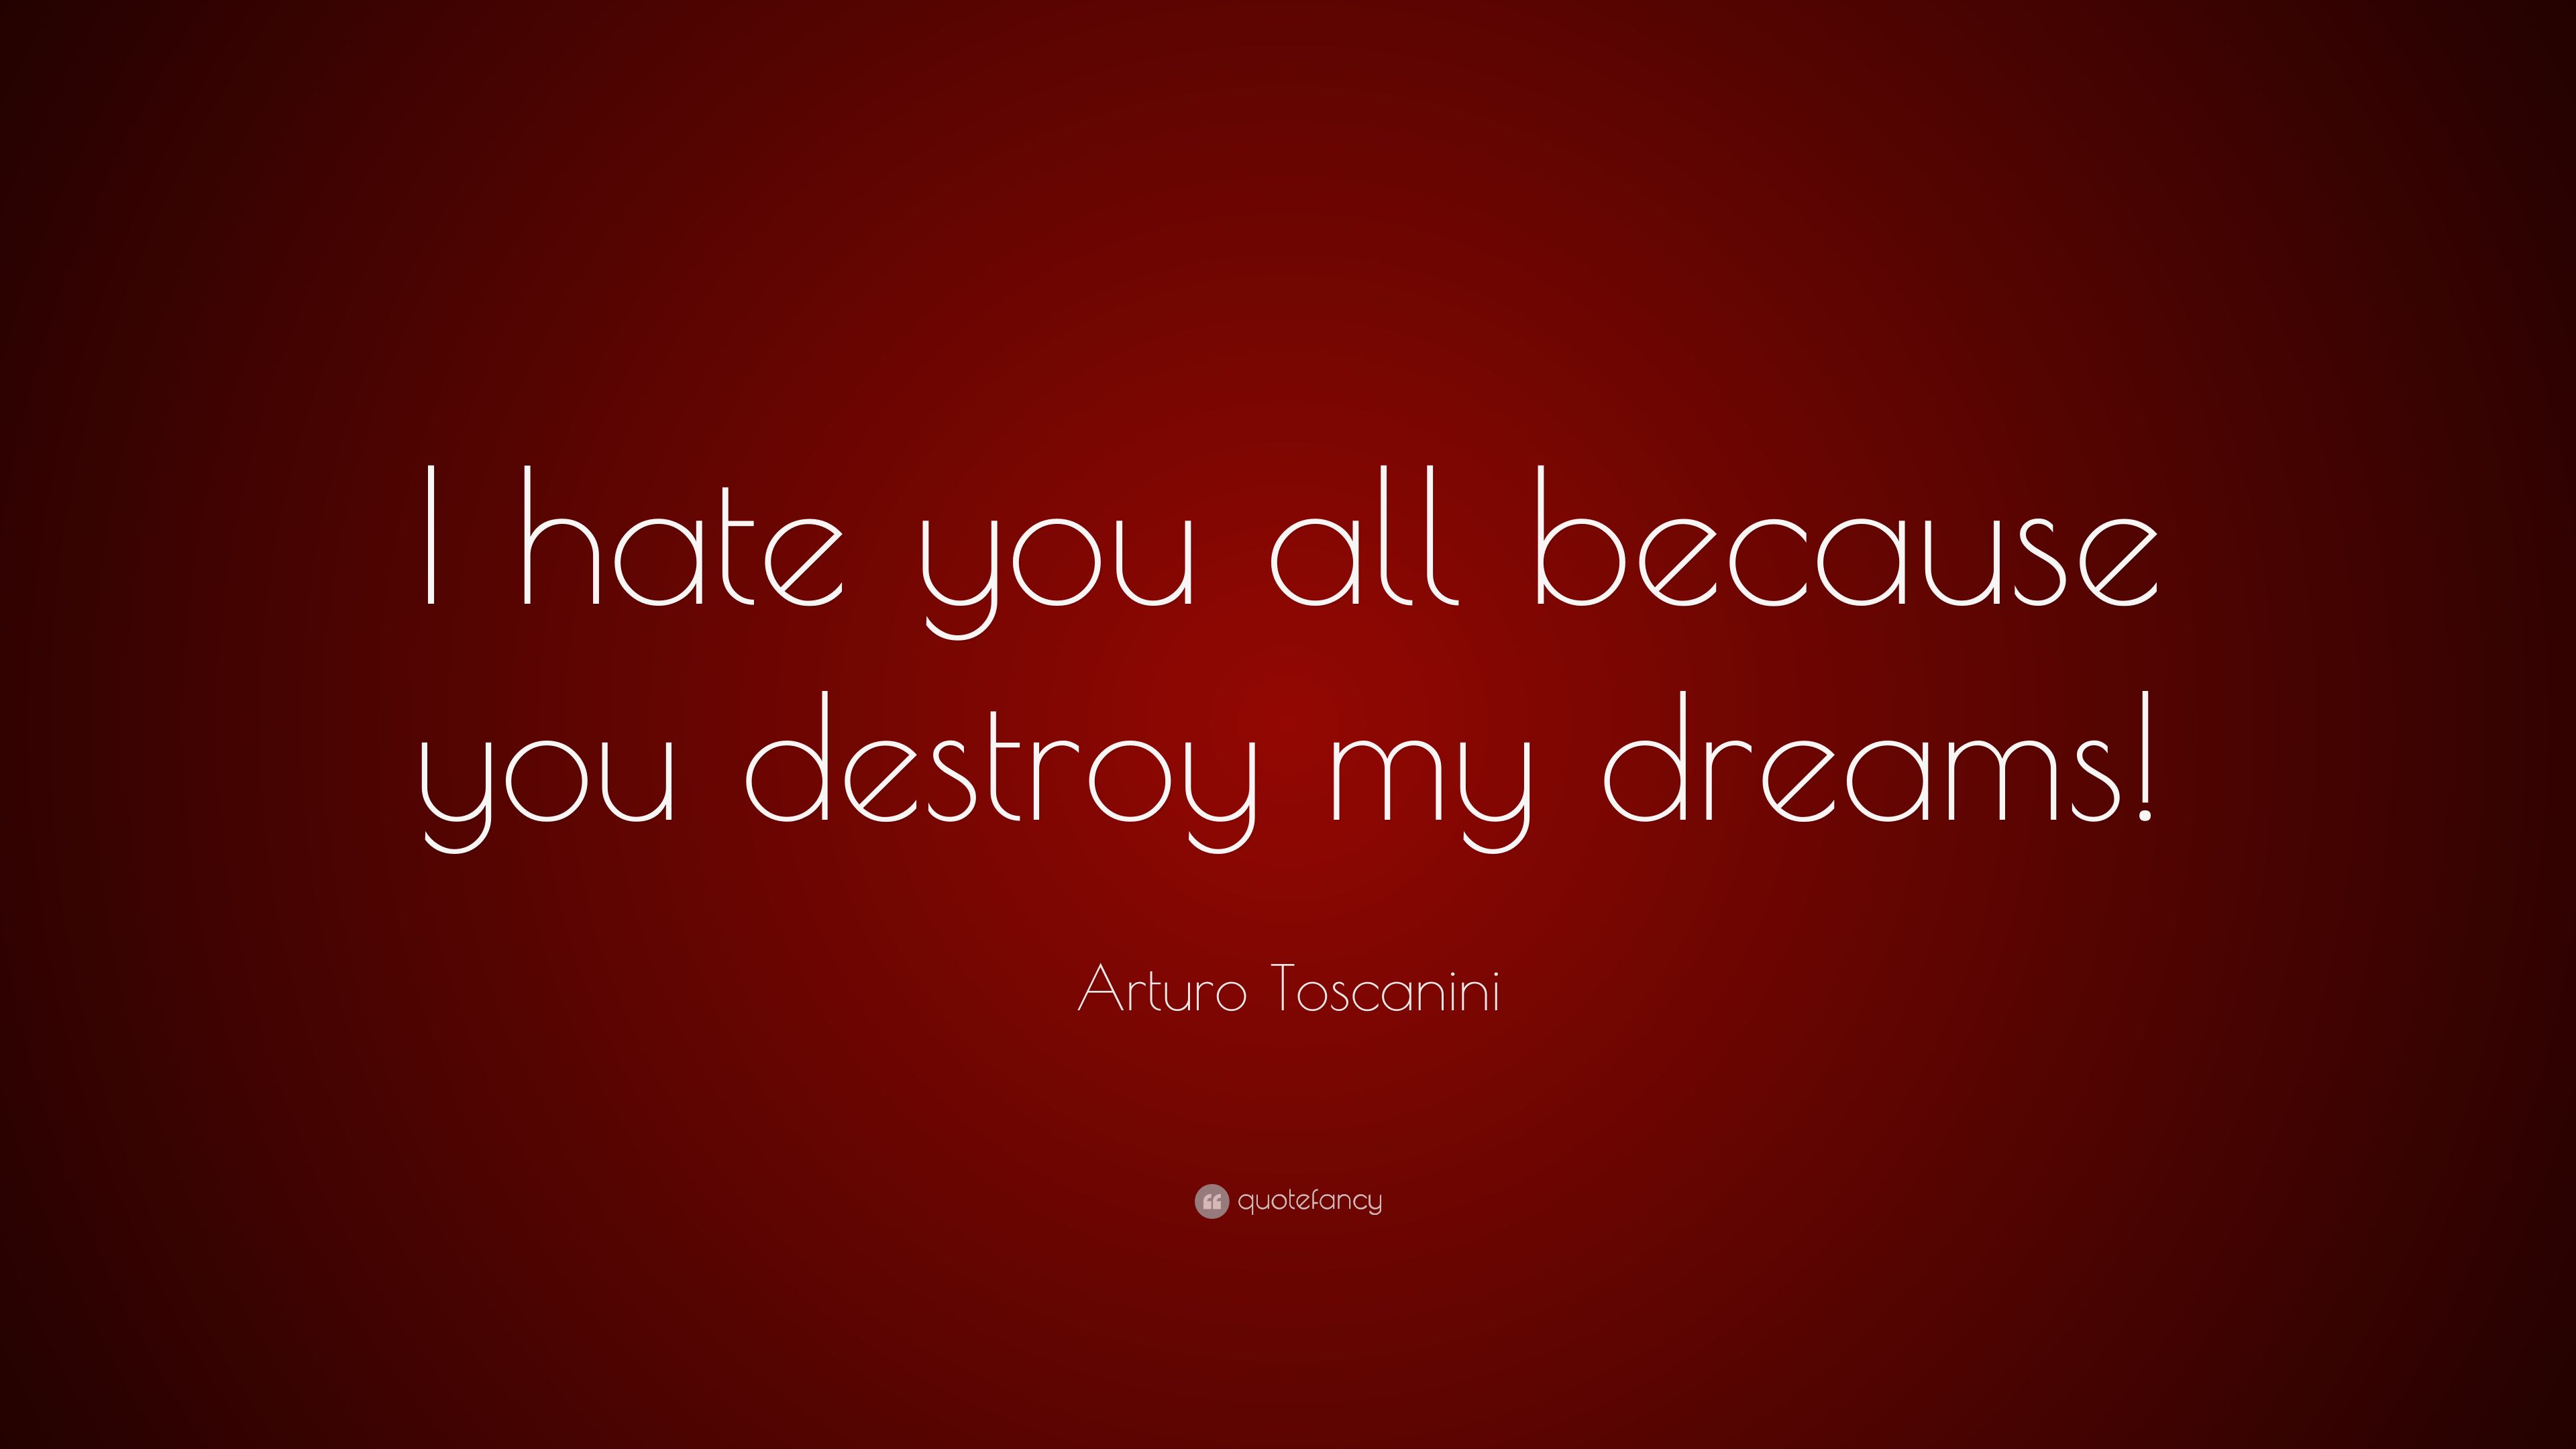 Arturo Toscanini Quote: “I hate you all because you destroy my